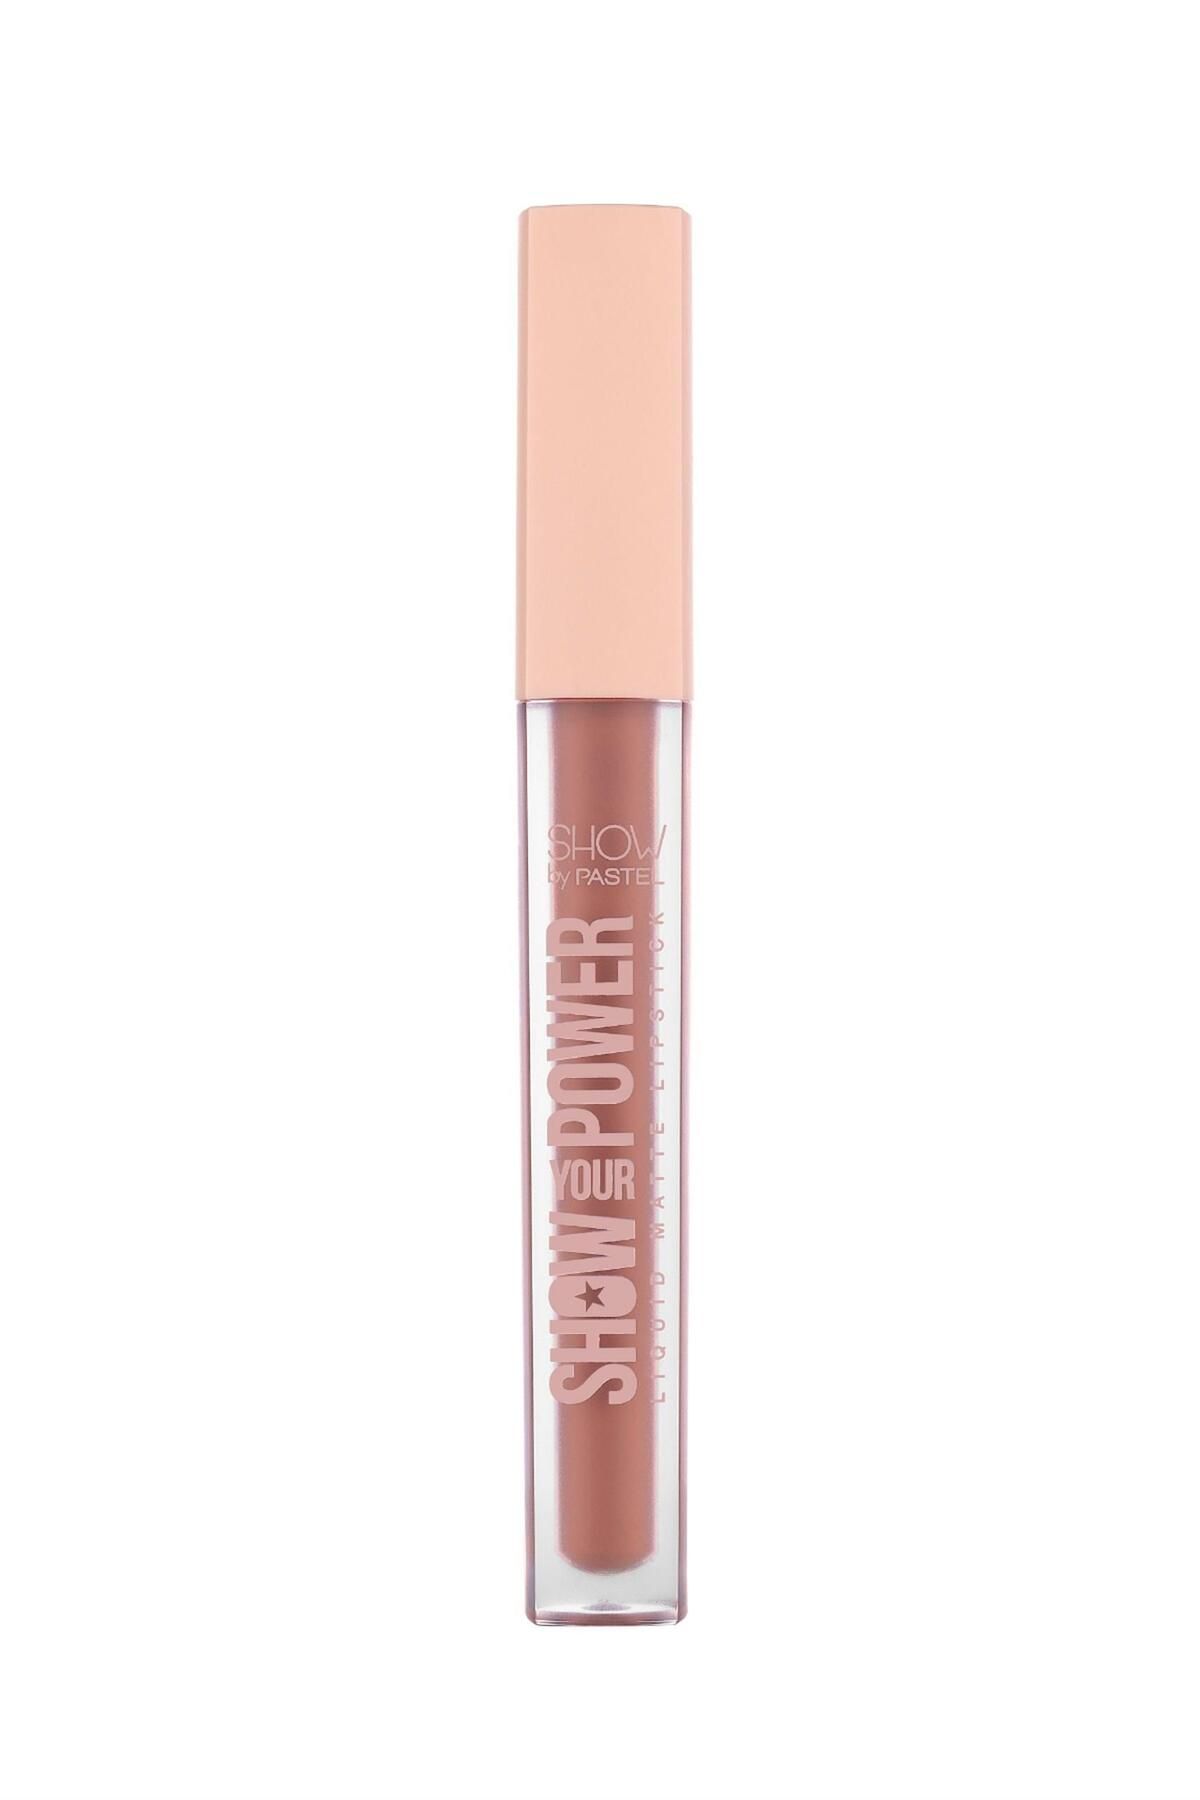 Show by Pastel Pastel Show Your Power Liquid Lipstick Likit Ruj 609